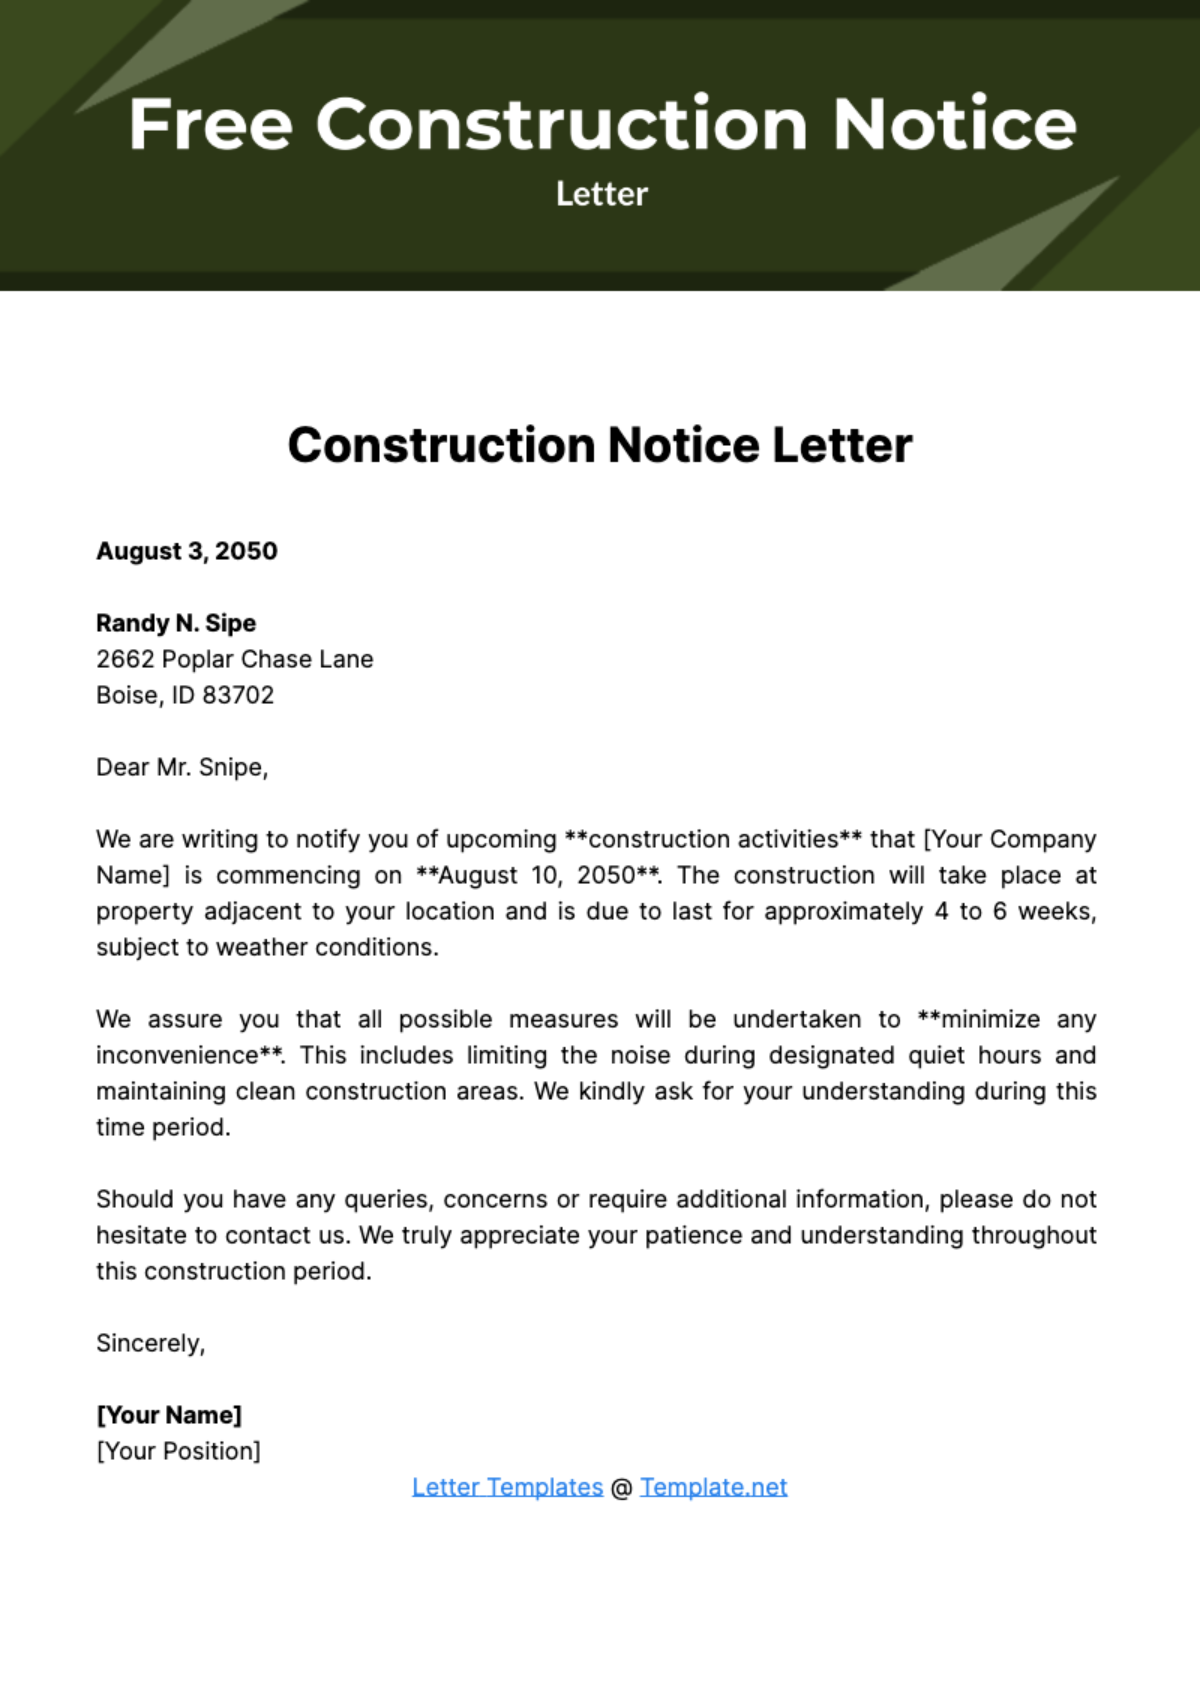 Free Construction Notice Letter Template